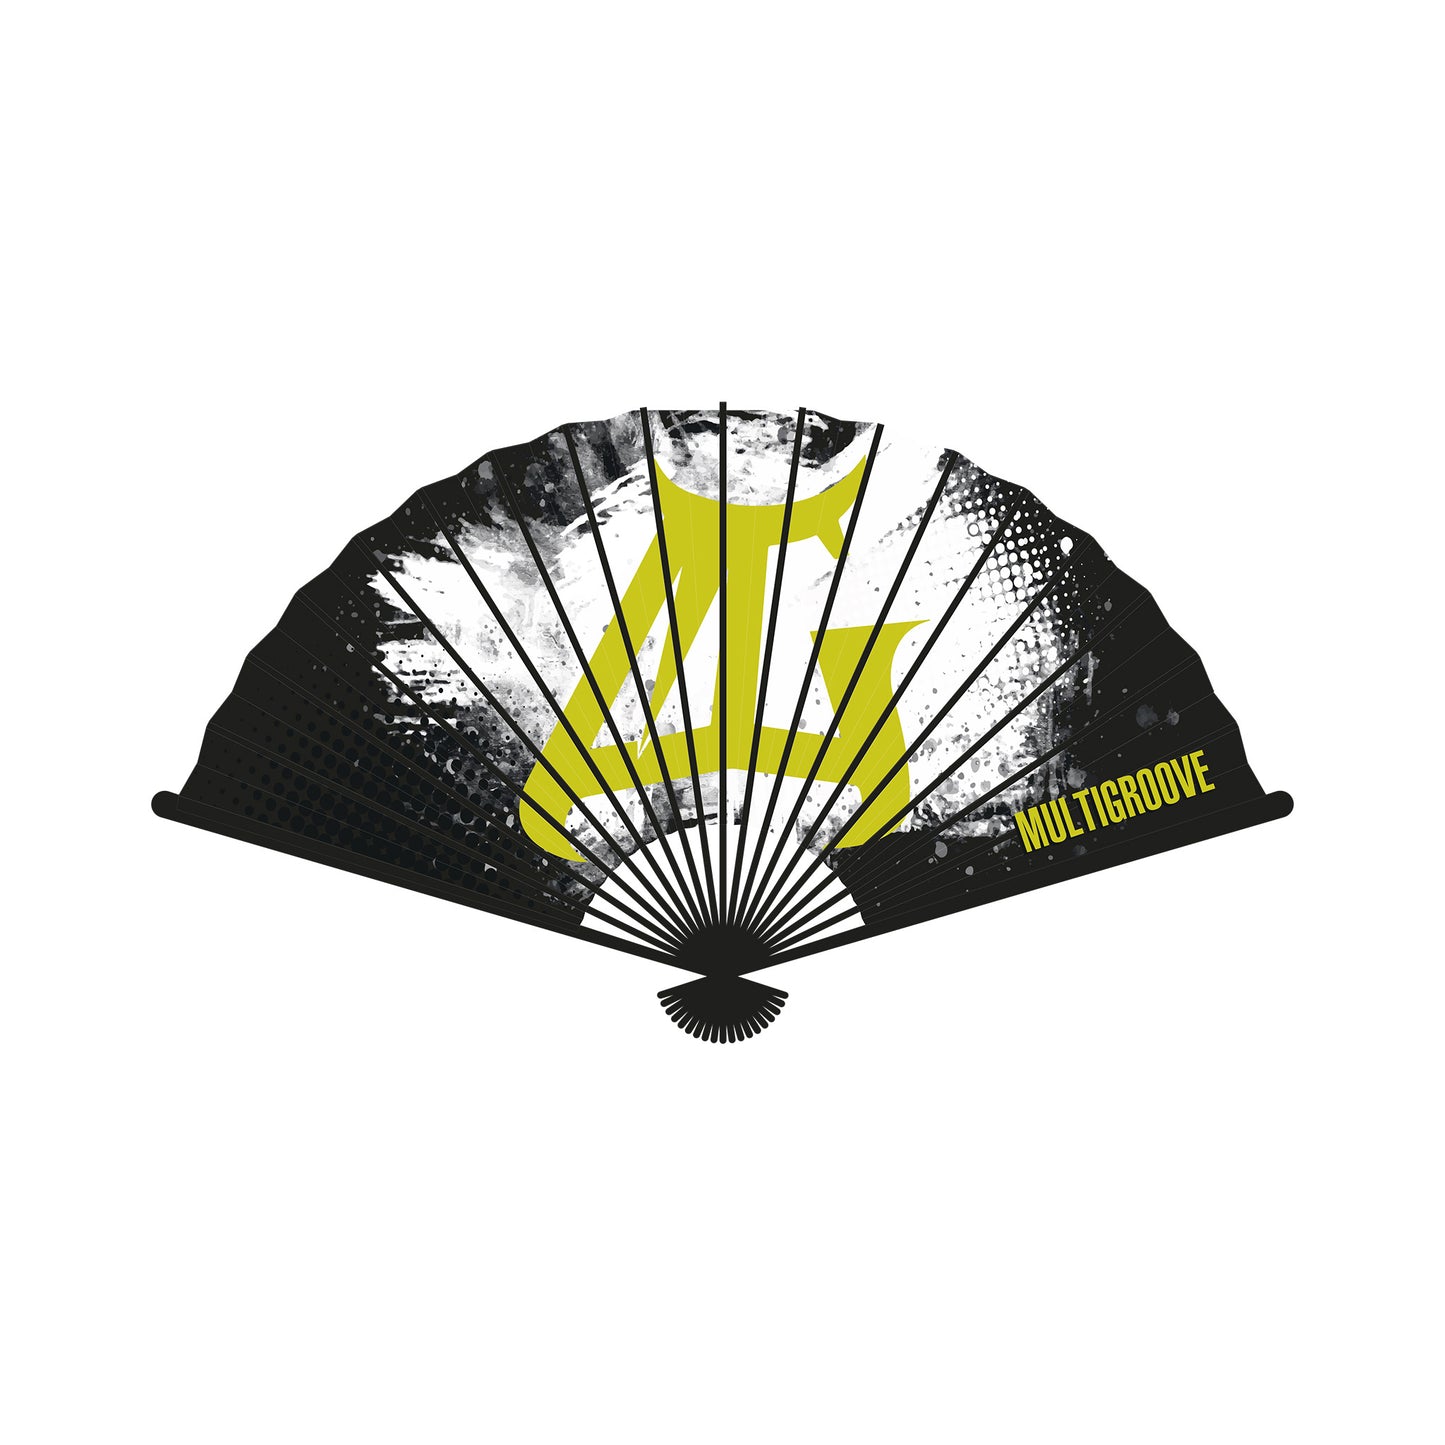 Multigroove Fan with yellow logo